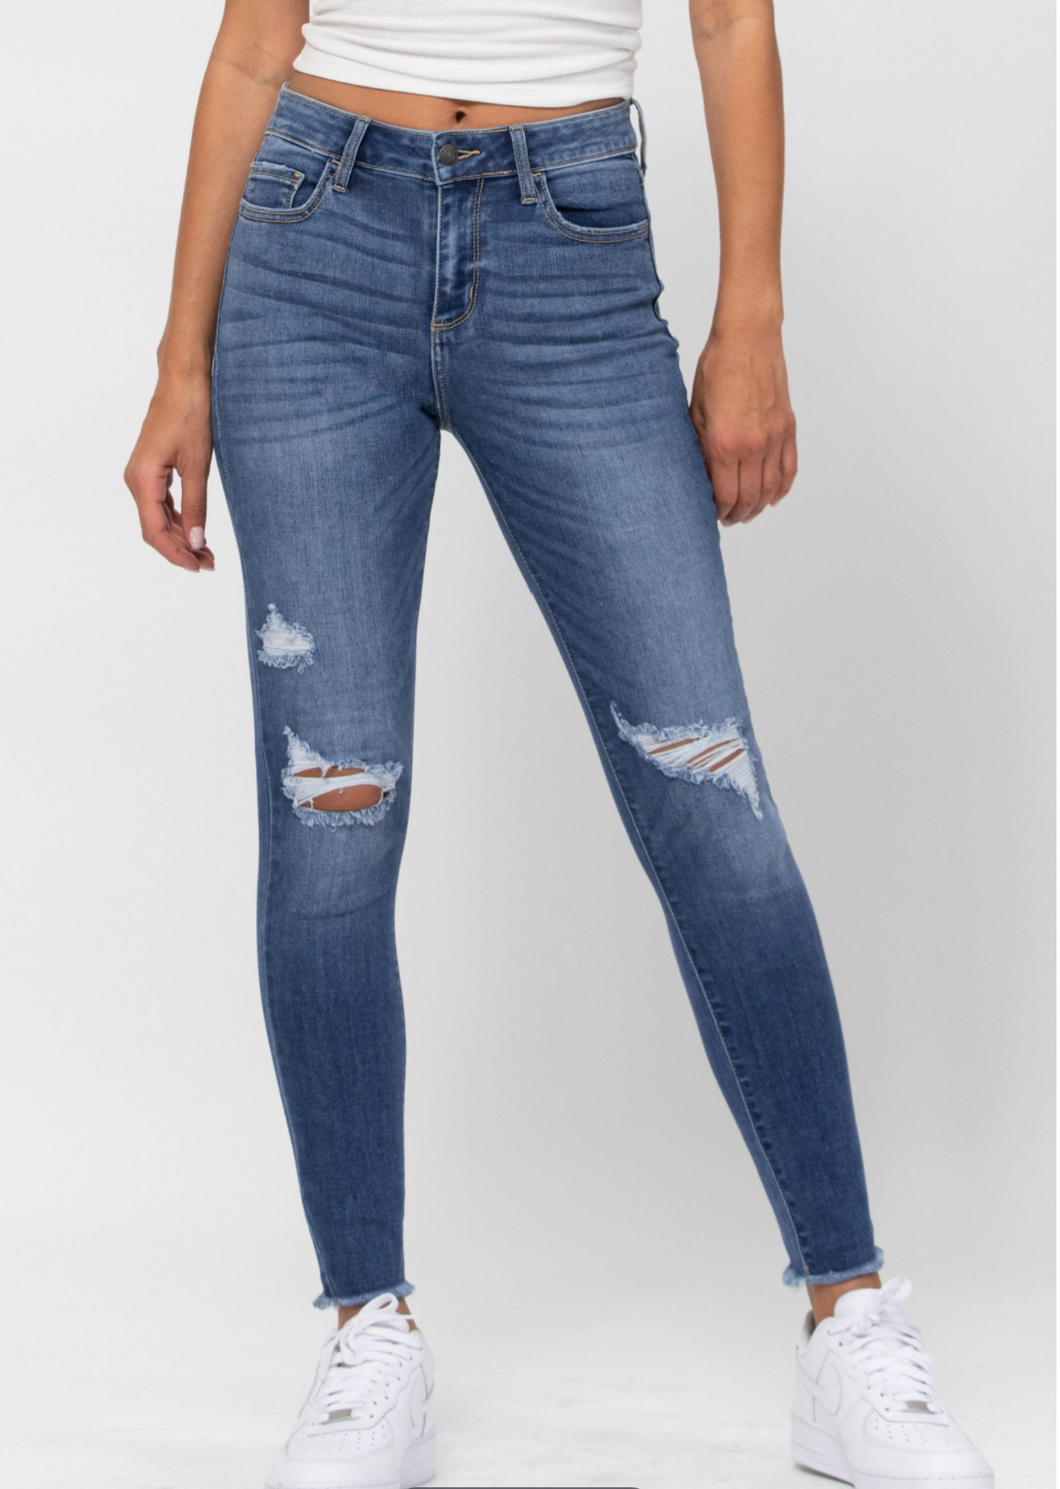 Now & Then Crop Skinny Jeans